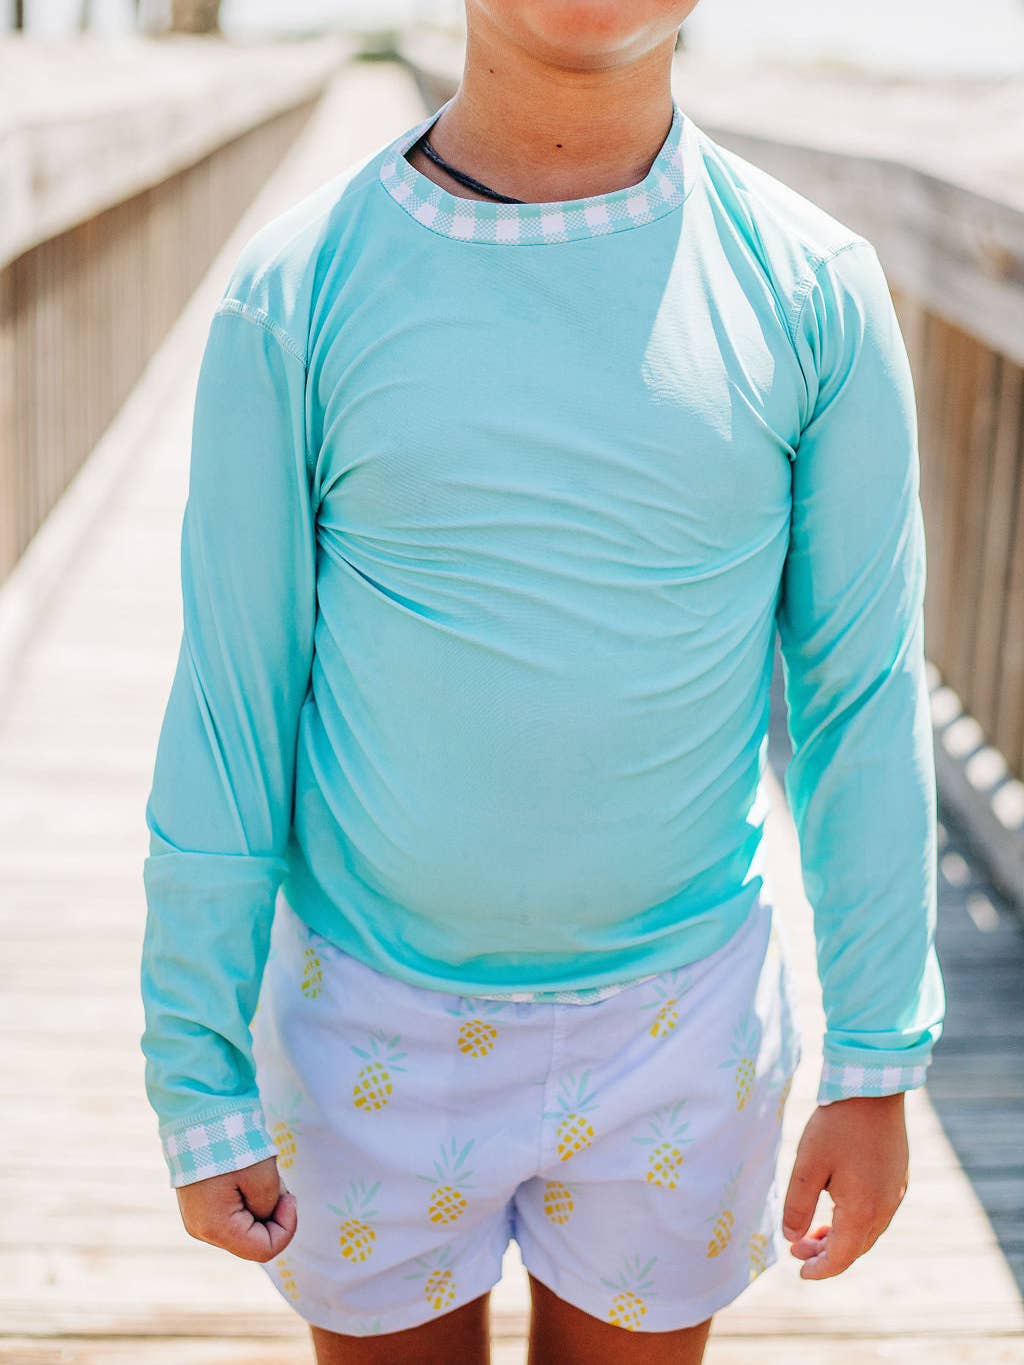 A young boy wearing a Boys Gingham Rashguard by Sugar Bee Clothing in a blue shirt and white shorts.